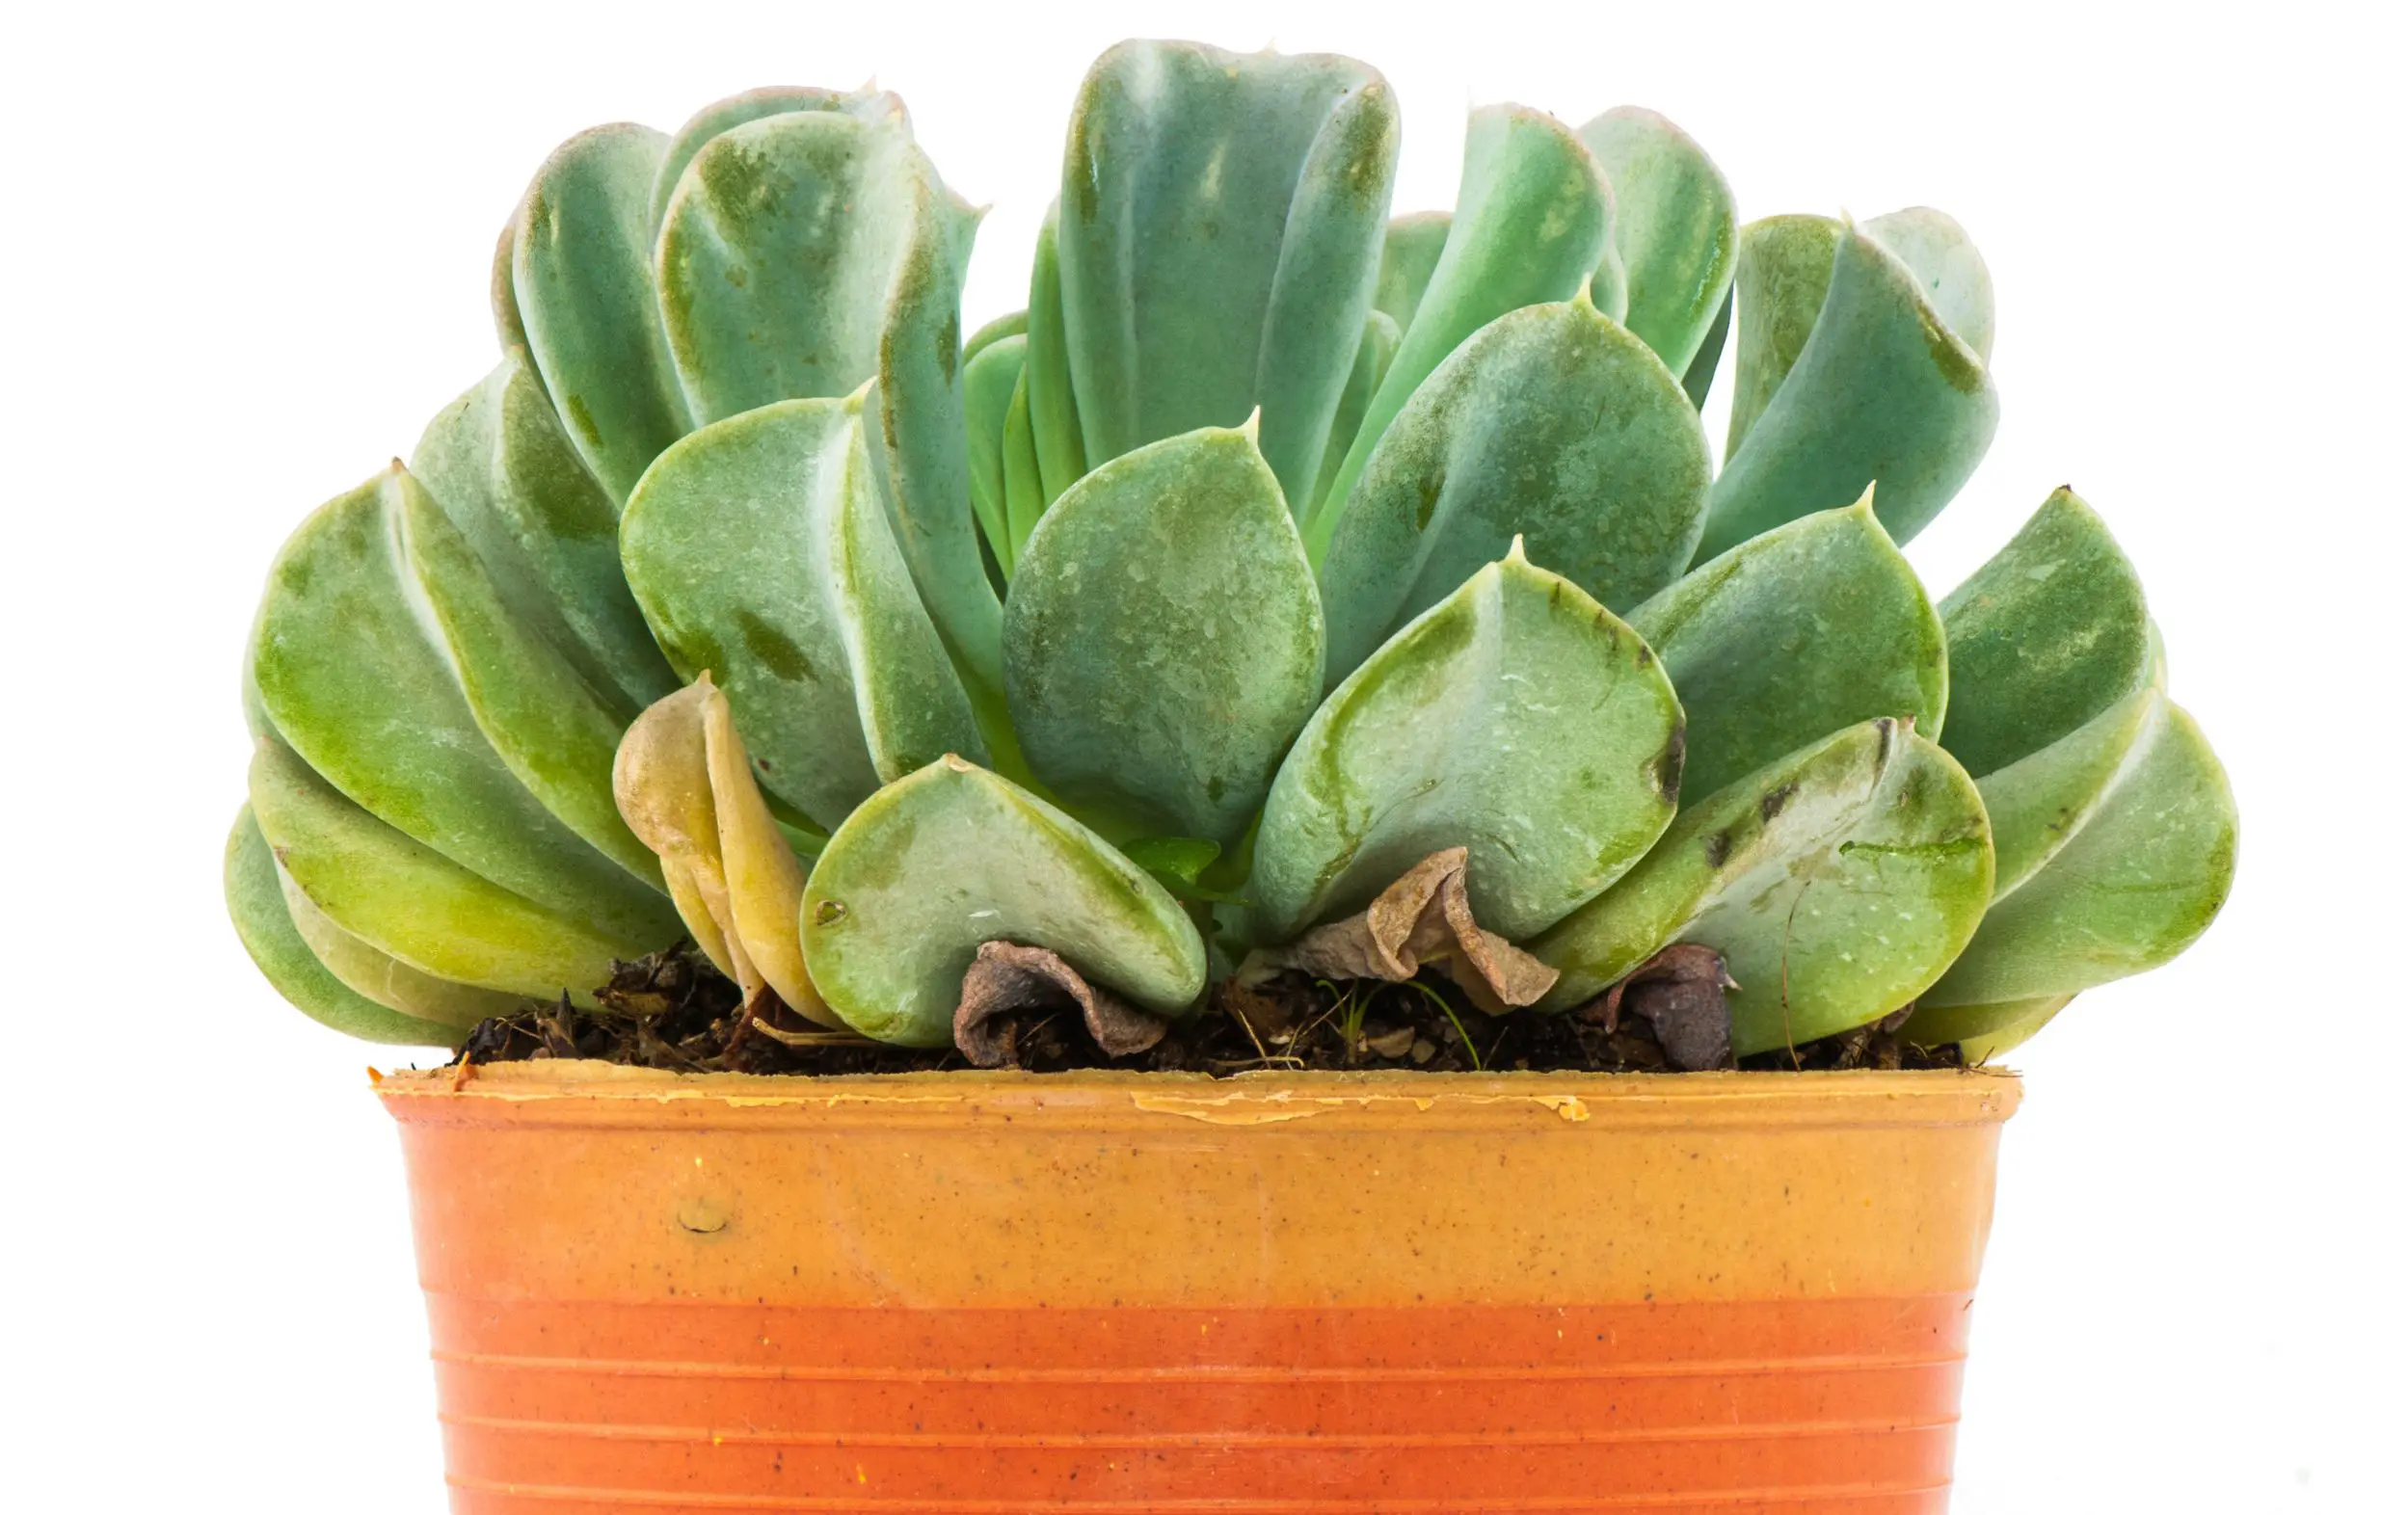 Echeveria - 21 Low Light Succulents for Home or Office - Green Garden Tribe